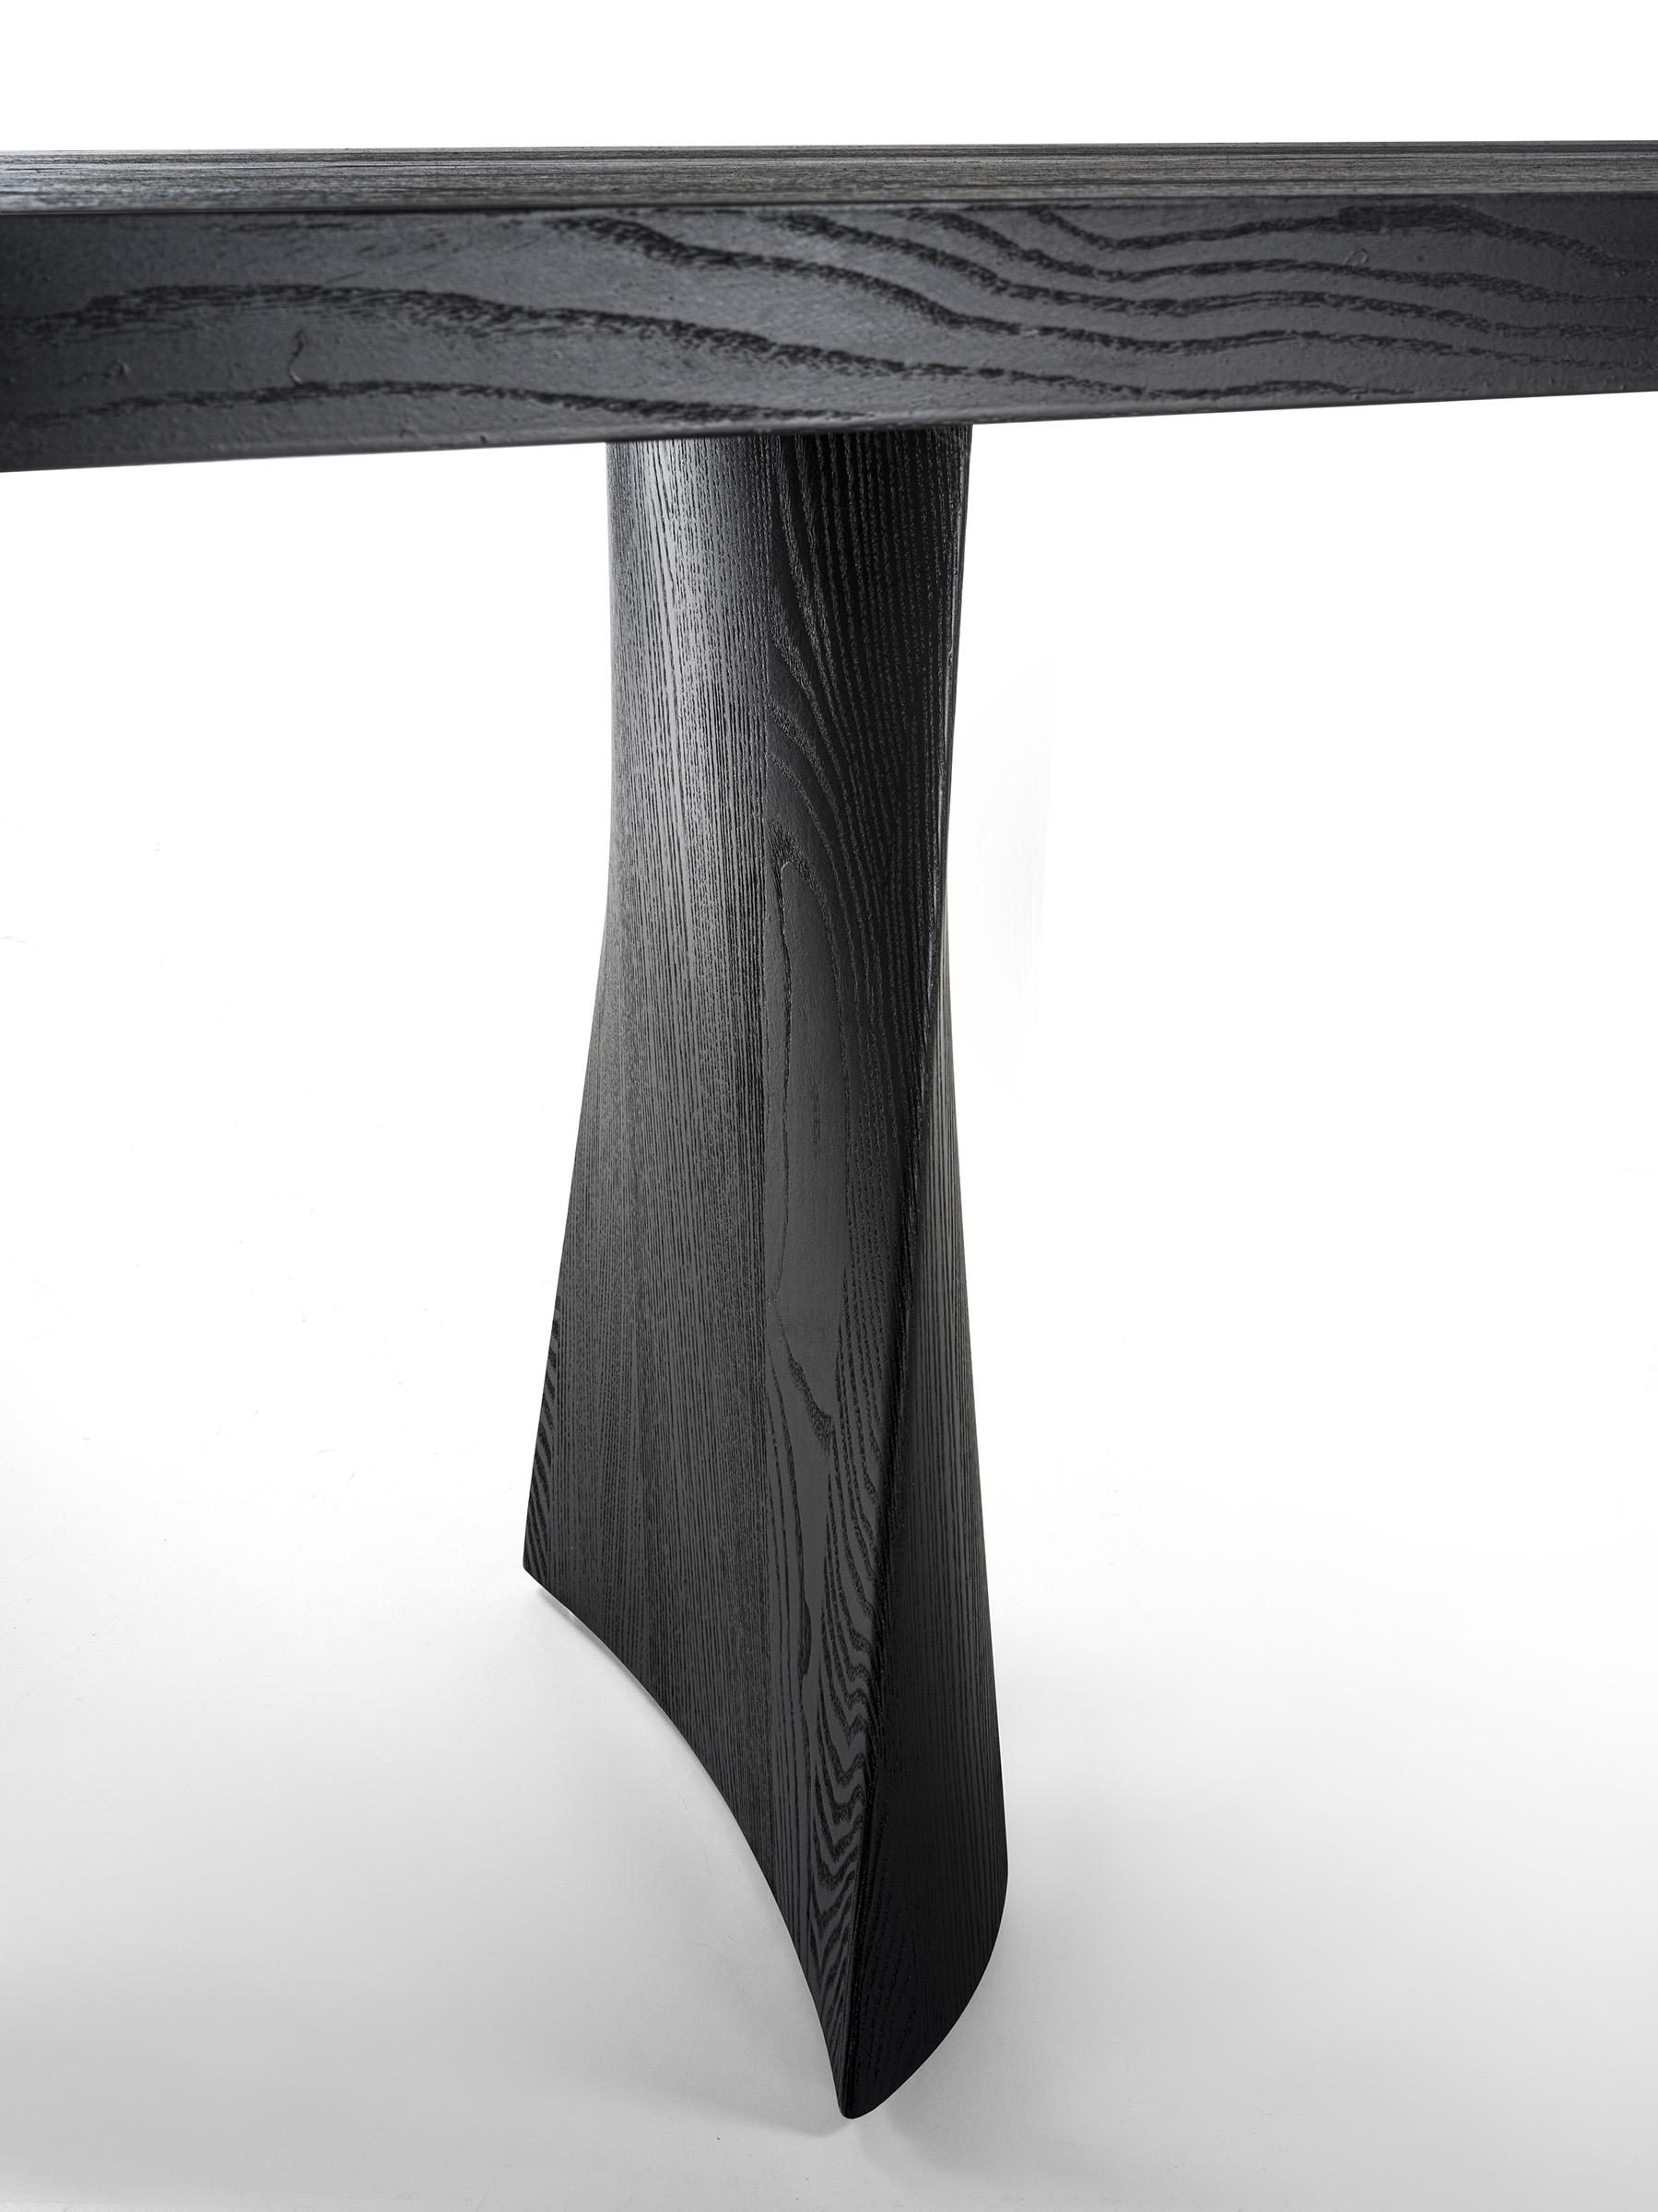 Simple Swing Wood Table, Designed by Studio Excalibur, Made in Italy For Sale 2